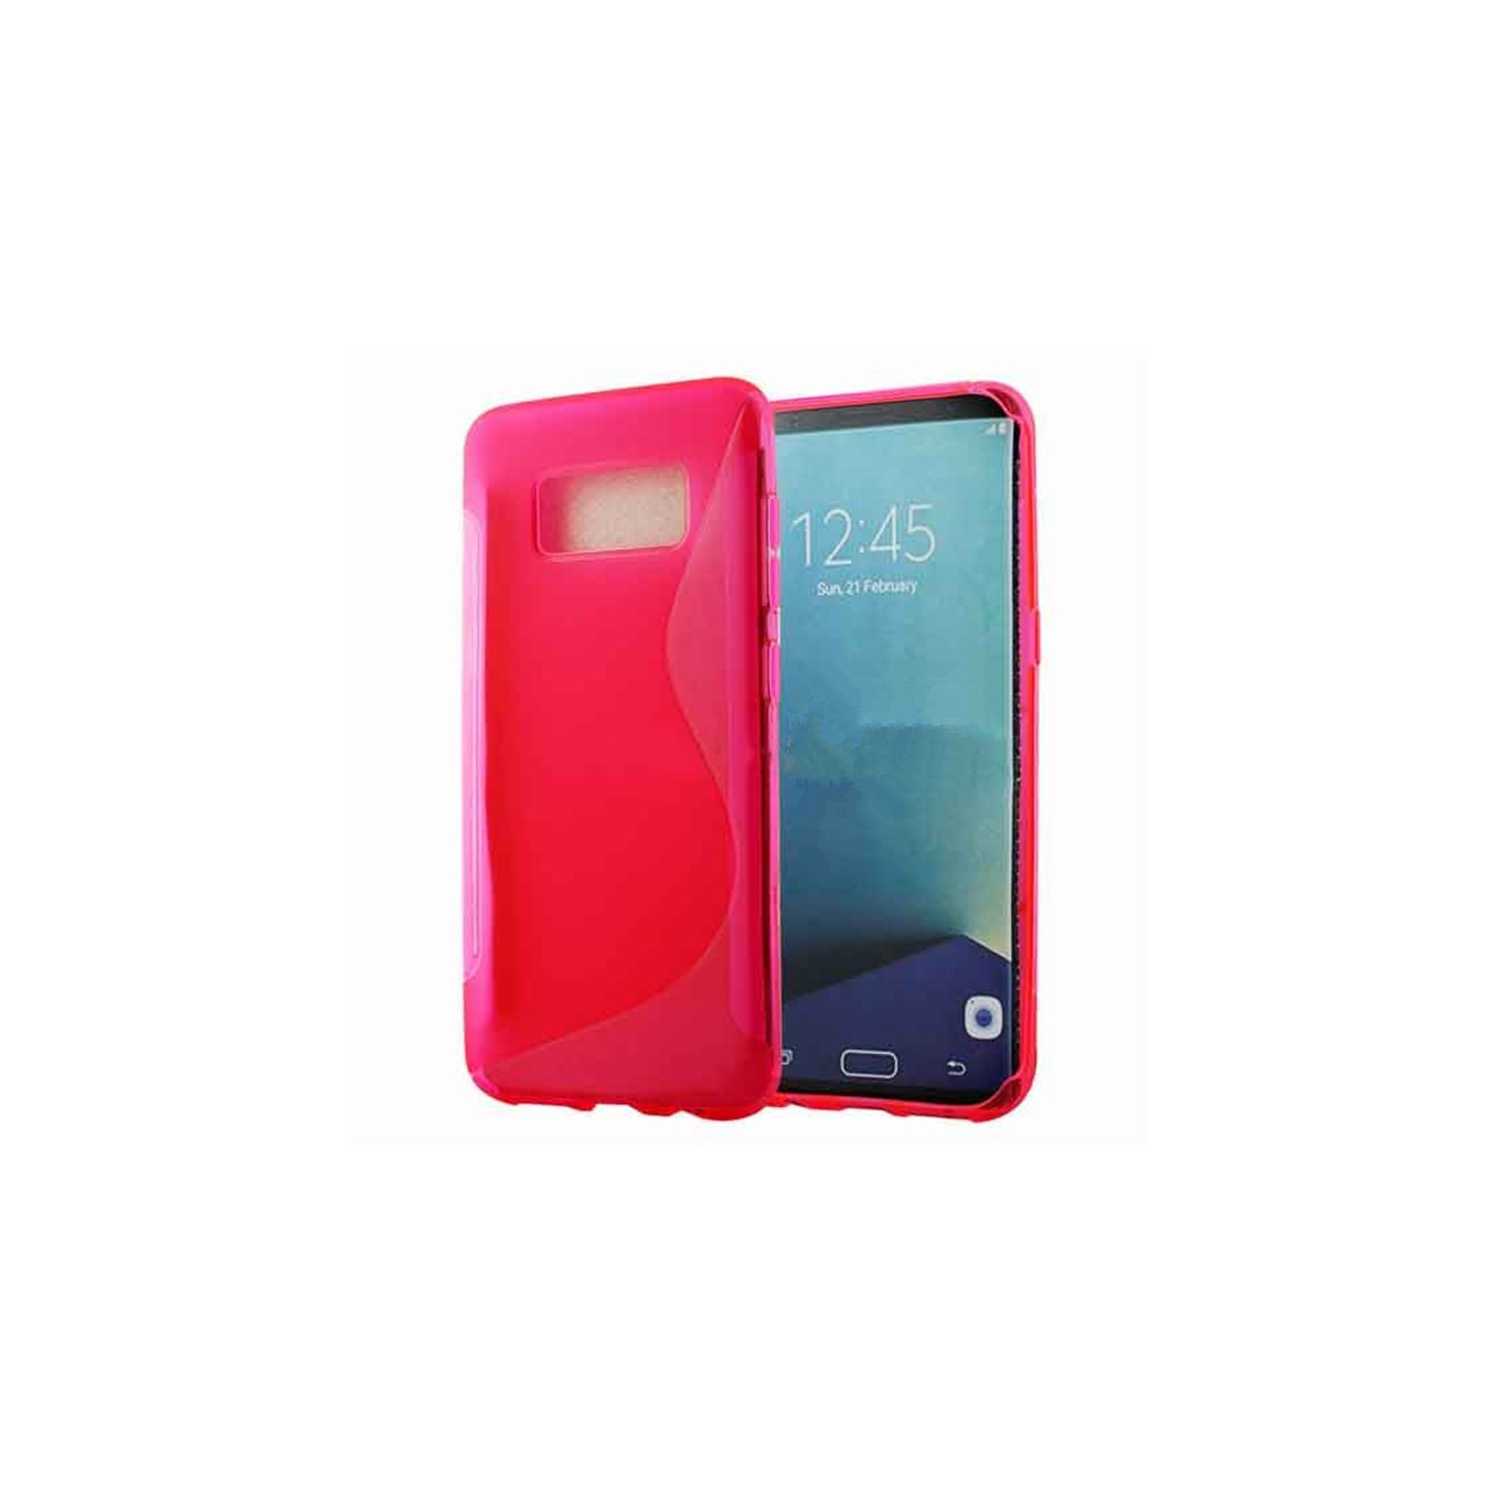 【CSmart】 Ultra Thin Soft TPU Silicone Jelly Bumper Back Cover Case for Samsung Galaxy S8 Plus, Hot Pink